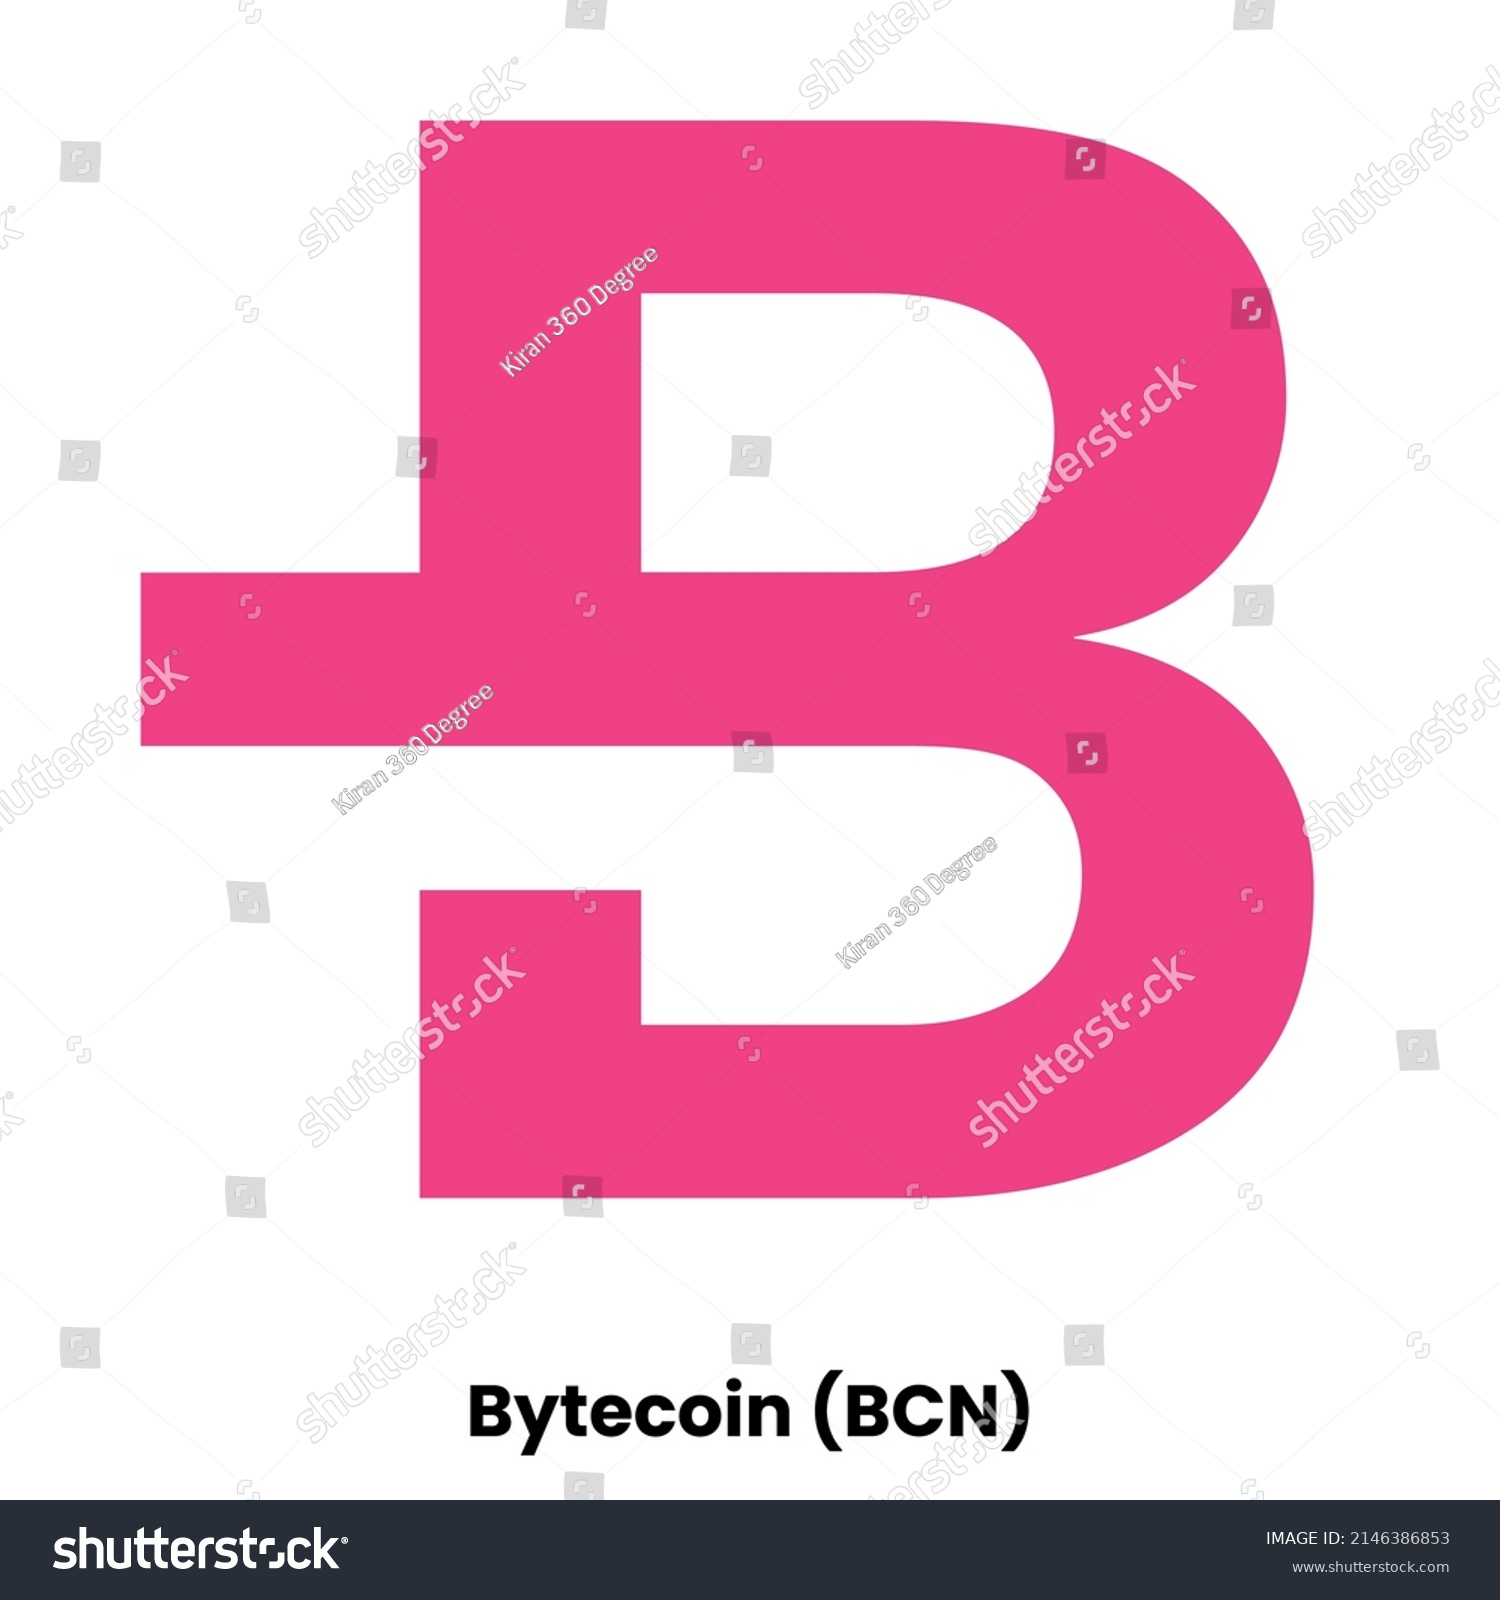 SVG of Bytecoin crypto currency with symbol BCN. Crypto logo vector illustration for stickers, icon, badges, labels and emblem designs. svg